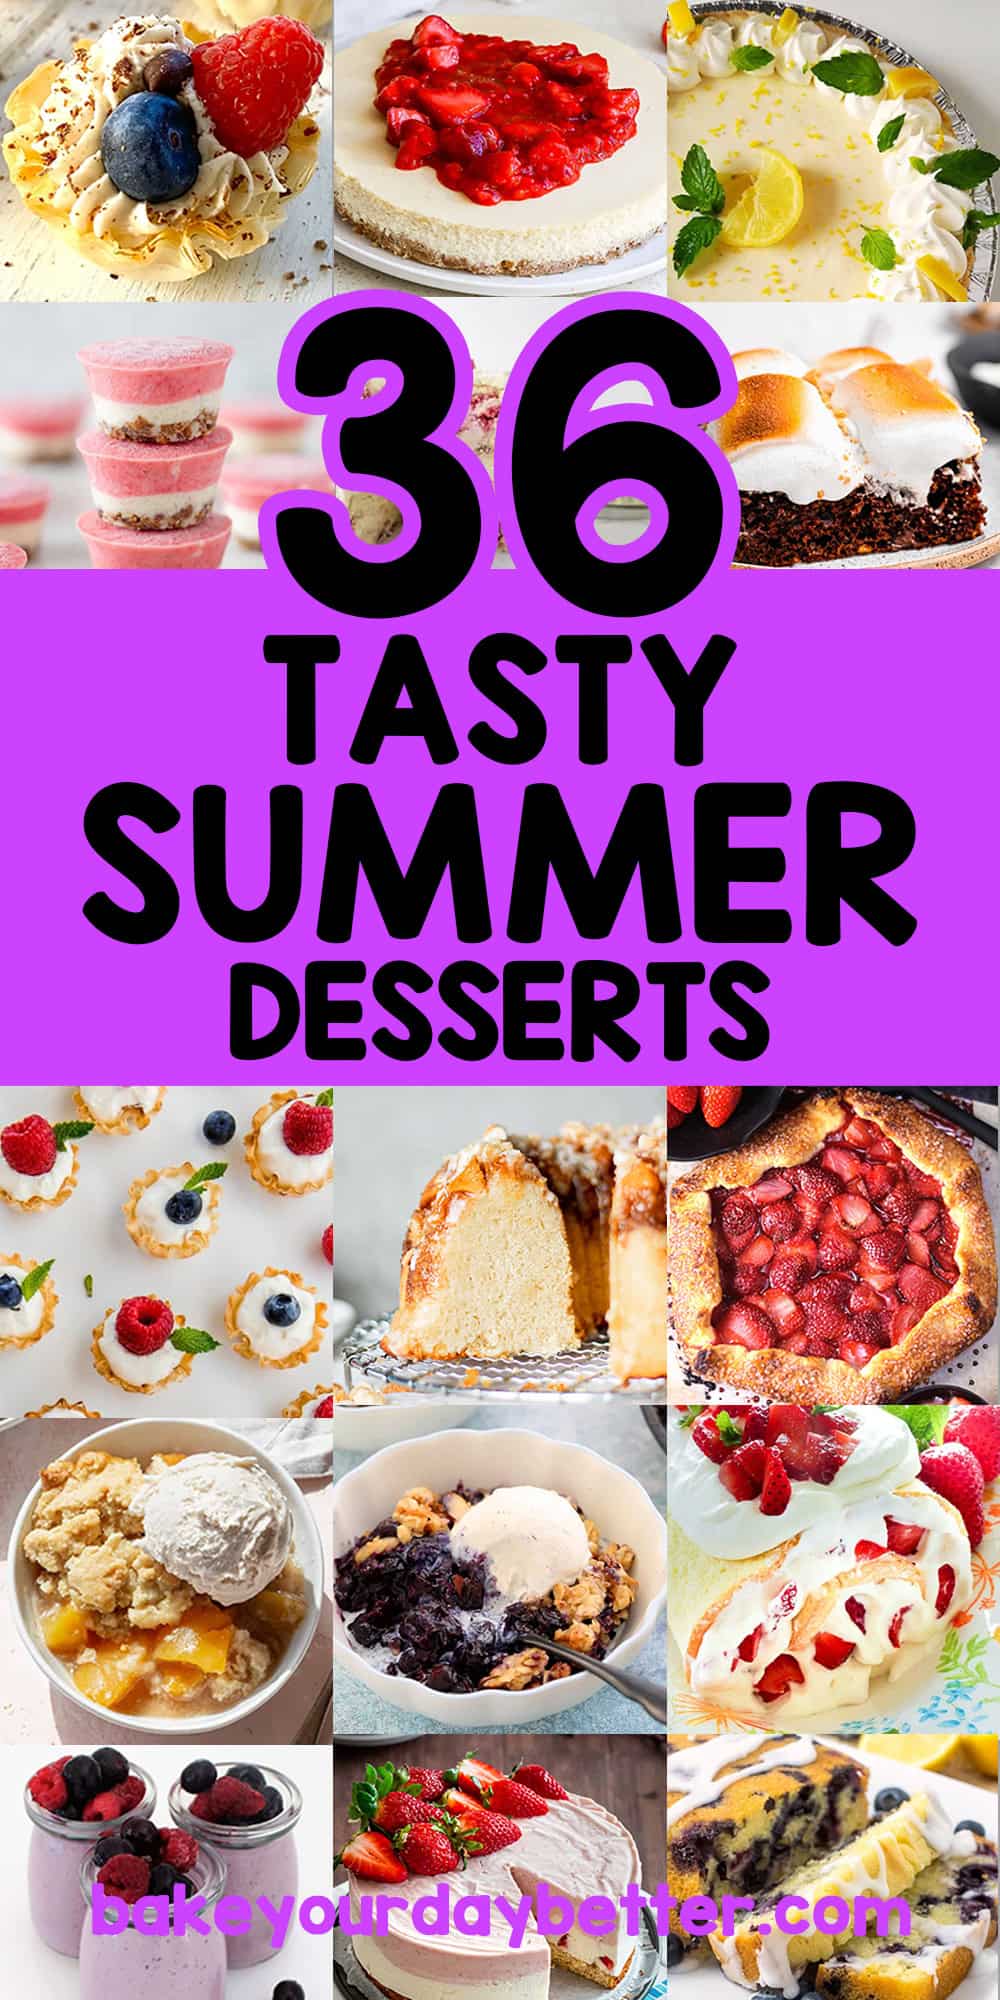 pictures of various summer desserts with text overlay that says: 36 tasty summer desserts